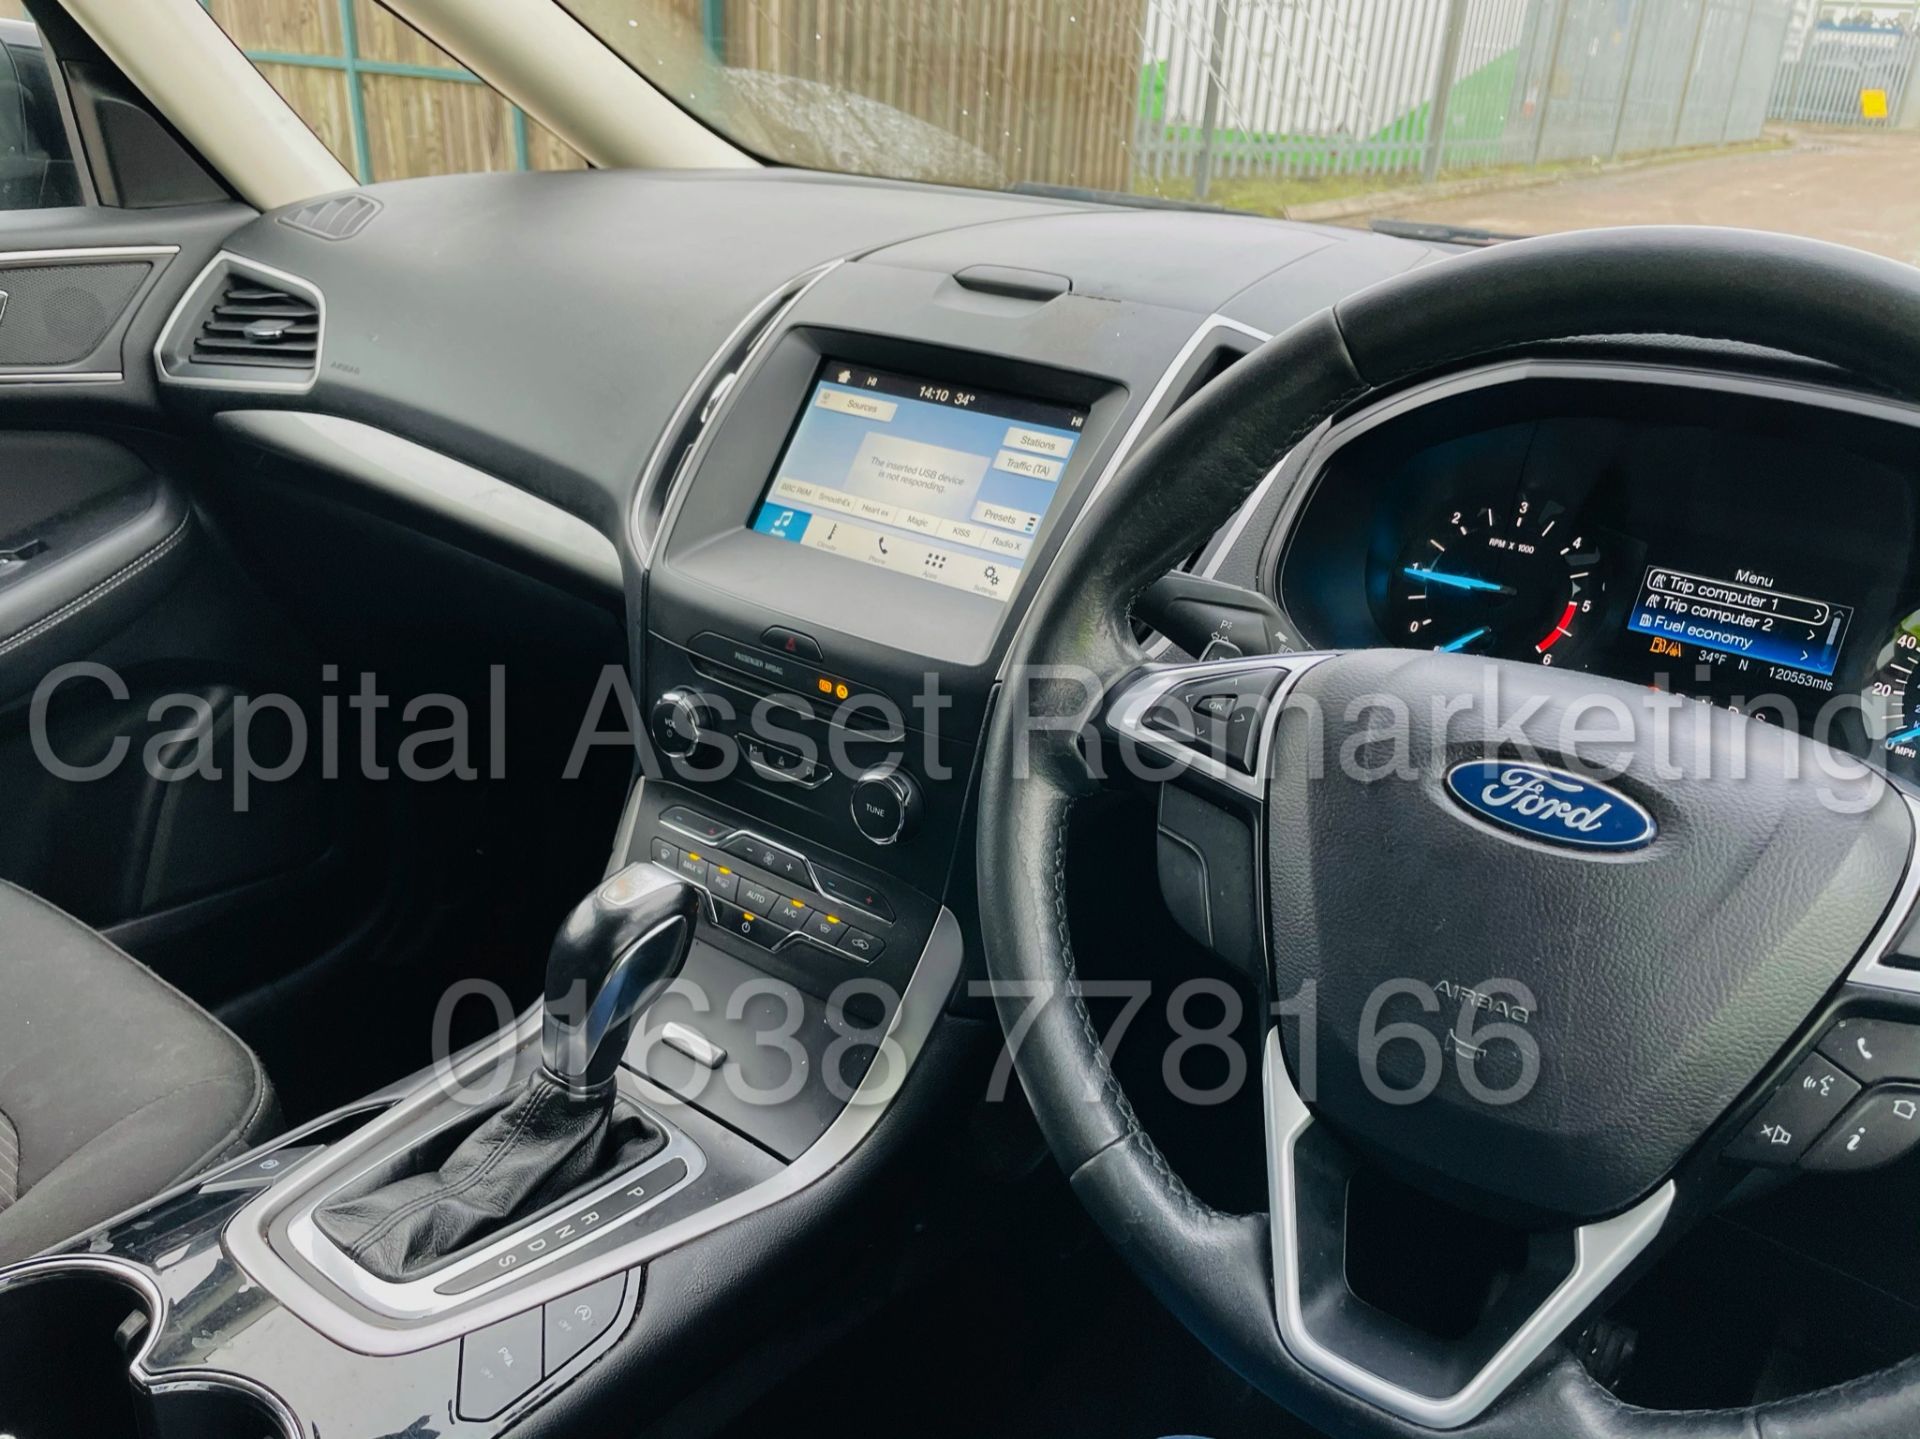 (ON SALE) FORD GALAXY *ZETEC EDITION* 7 SEATER MPV (2017 - EURO 6) '2.0 TDCI - AUTO' (1 OWNER) - Image 38 of 48